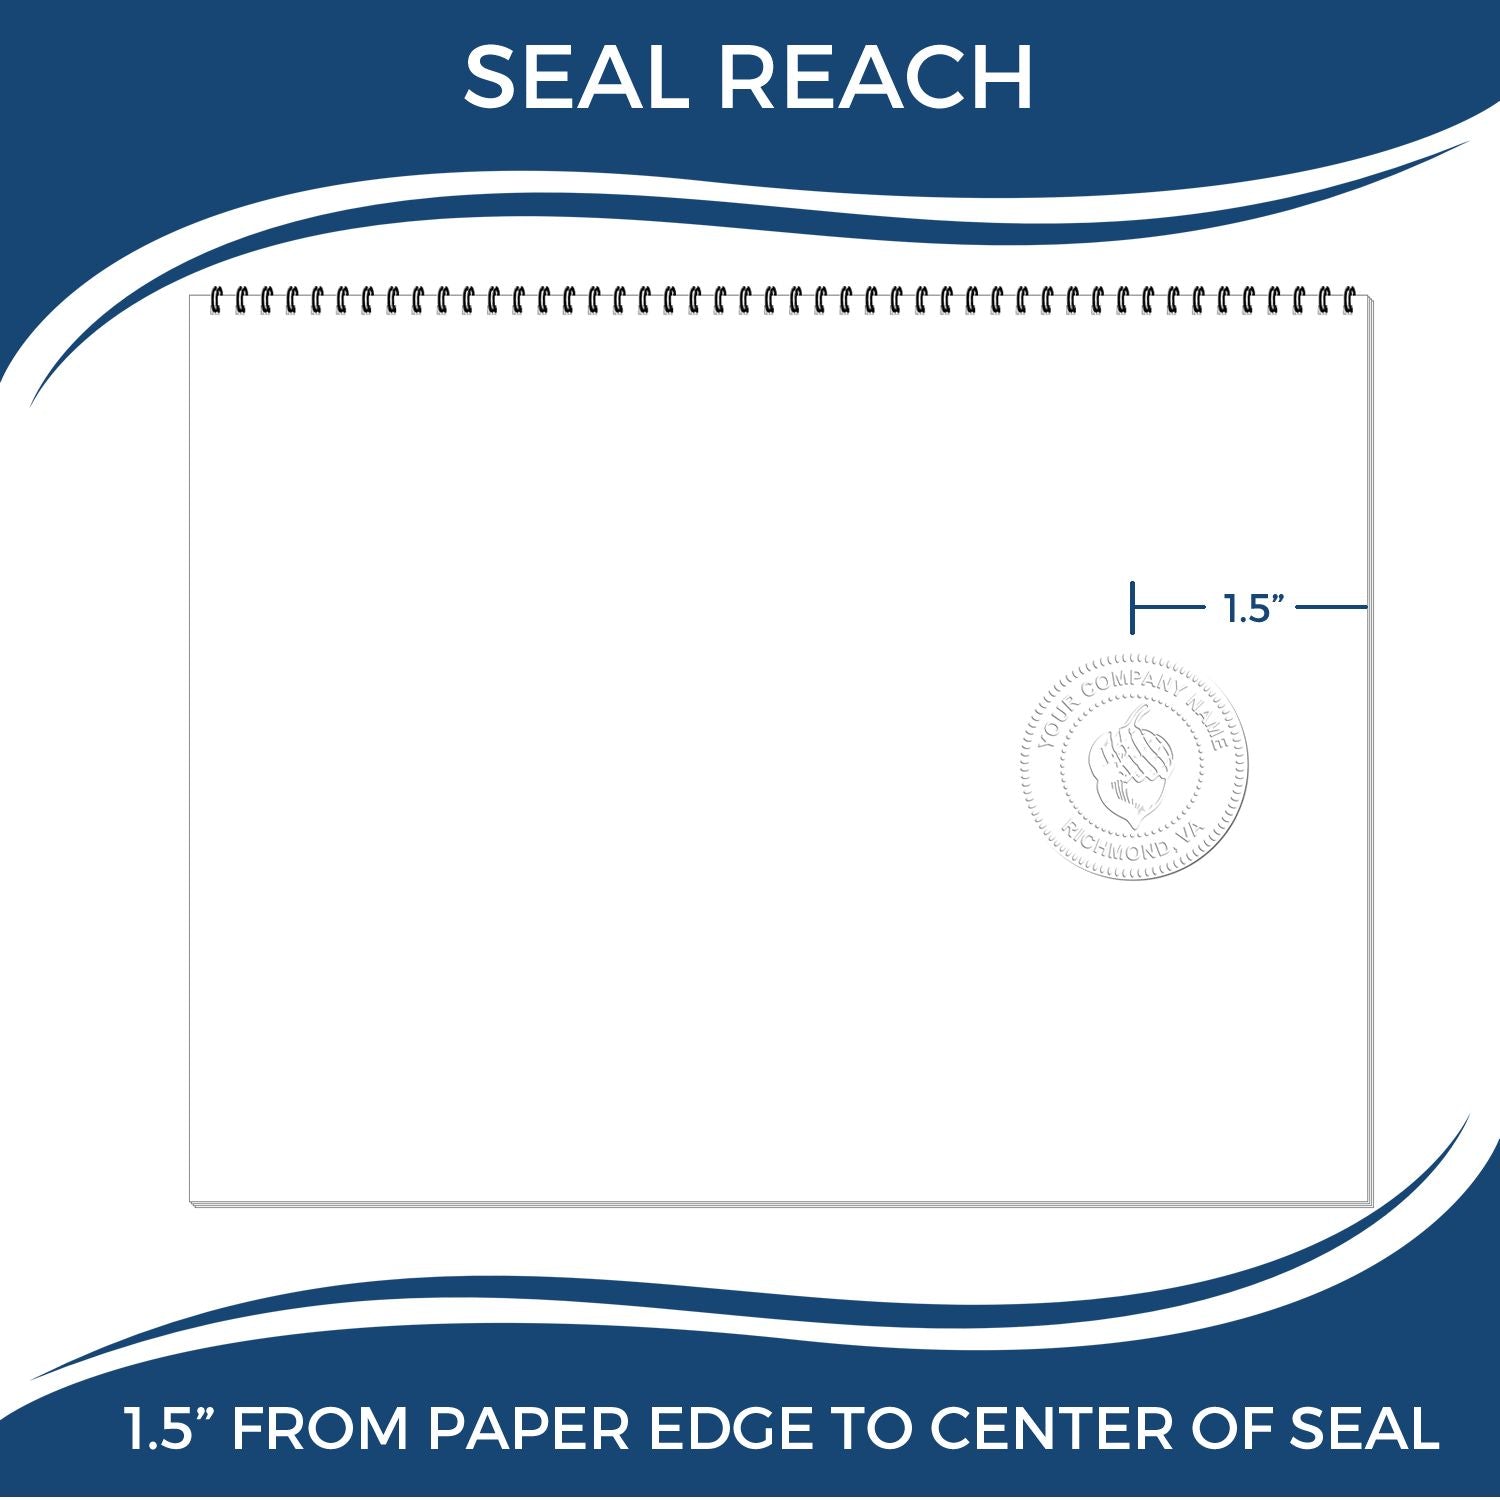 An infographic showing the seal reach which is represented by a ruler and a miniature seal image of the Kentucky Desk Landscape Architectural Seal Embosser